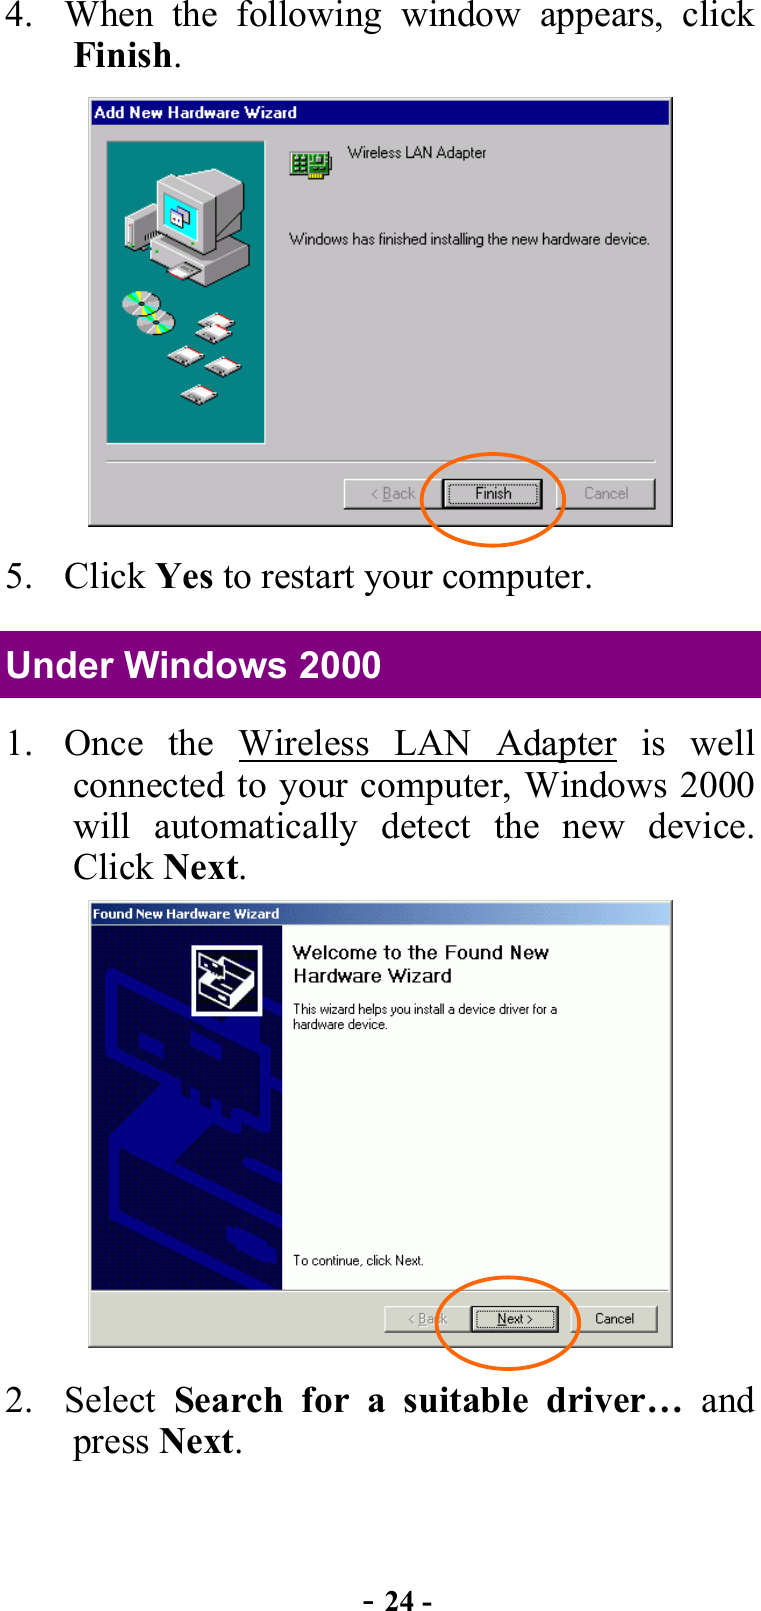  - 24 - 4.  When the following window appears, click Finish.  5. Click Yes to restart your computer. Under Windows 2000 1.  Once the Wireless LAN Adapter is well connected to your computer, Windows 2000 will automatically detect the new device.  Click Next.  2. Select Search for a suitable driver… and press Next. 